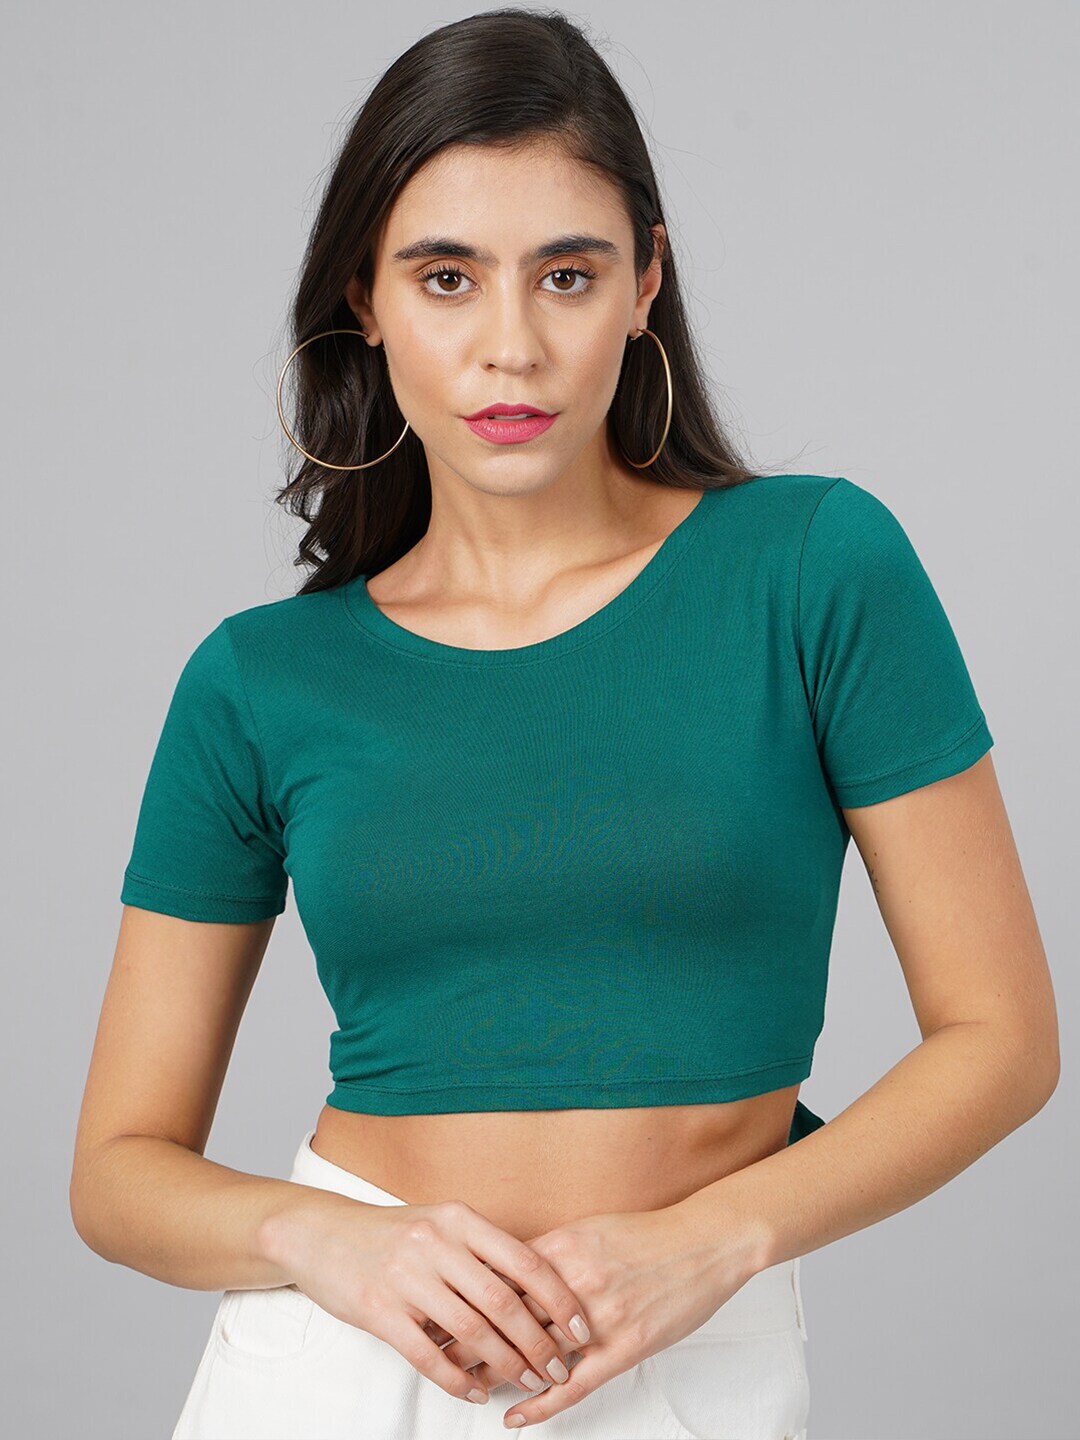 SCORPIUS Women Teal Styled Back Crop Top Price in India